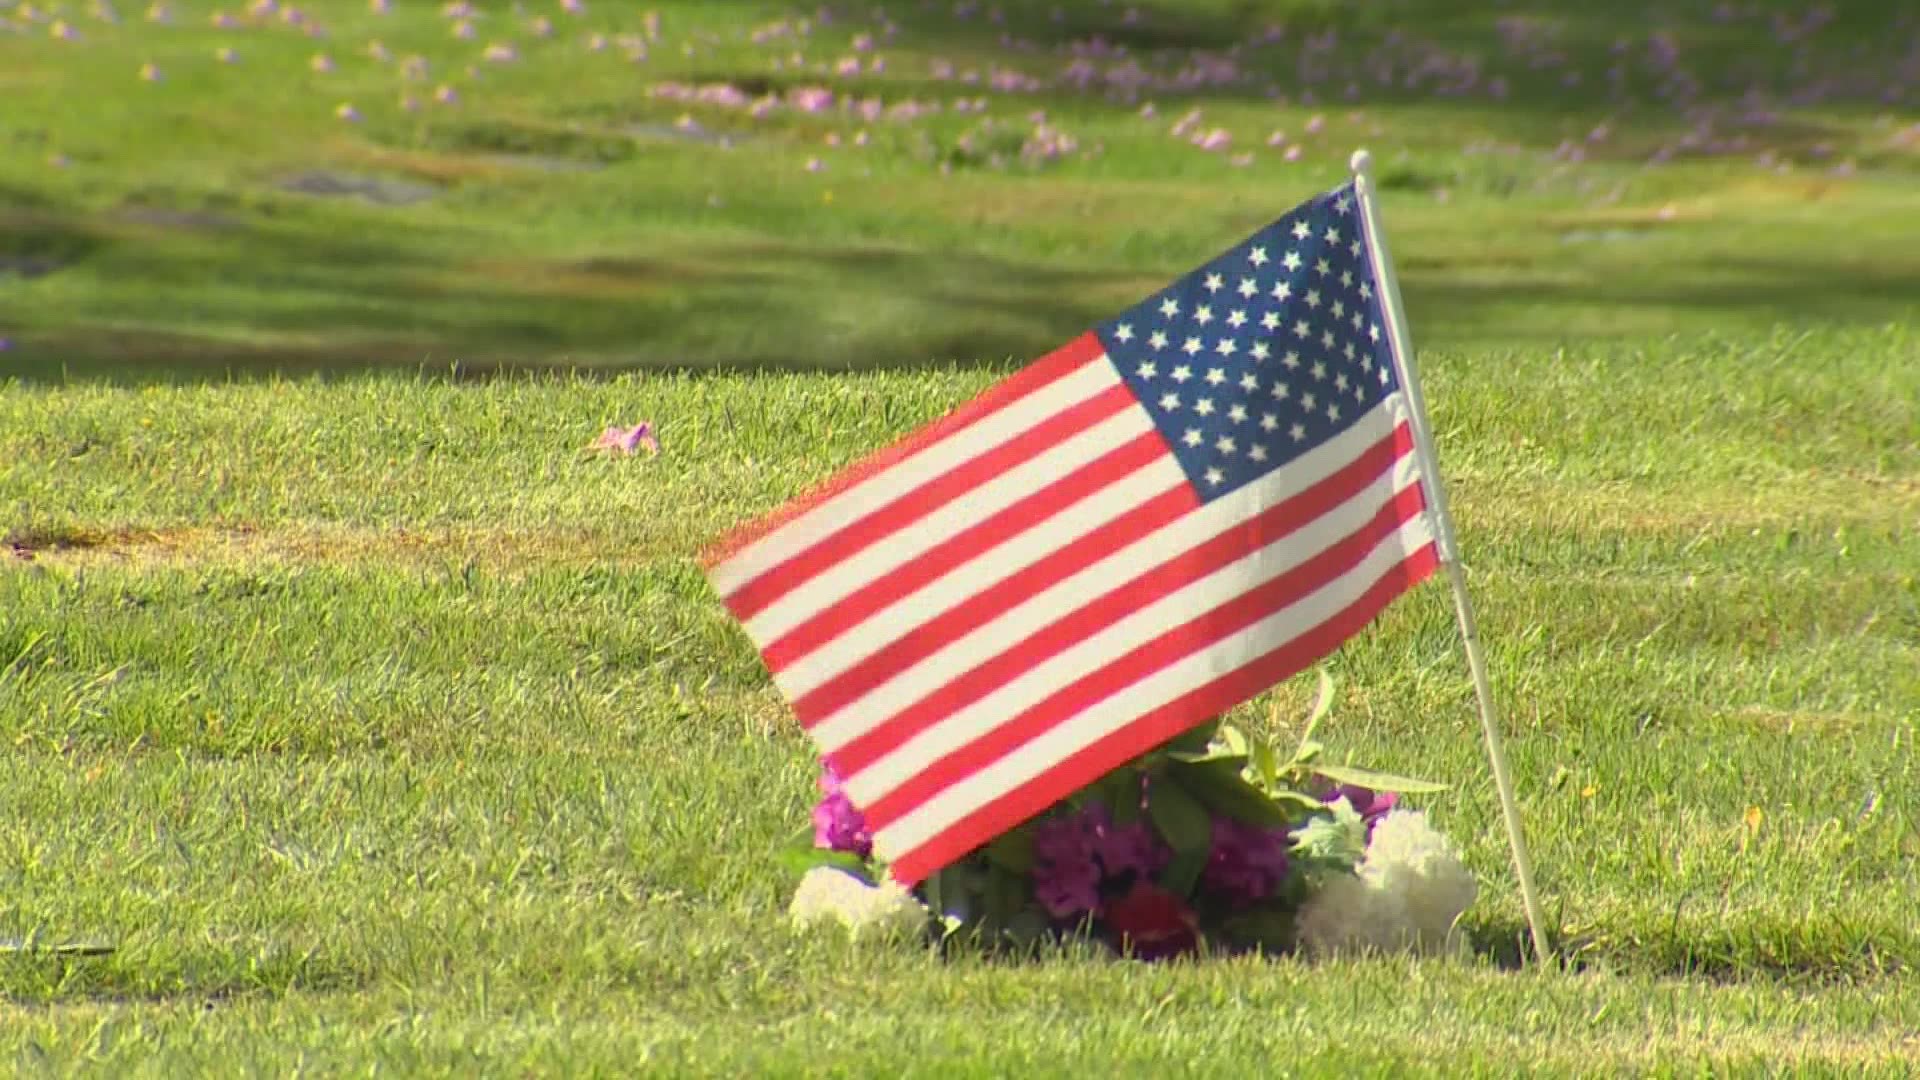 Lakewood's Mountain View Memorial Park invited volunteers to place flags at the graves of military members and will host a ceremony with full military honors Monday.